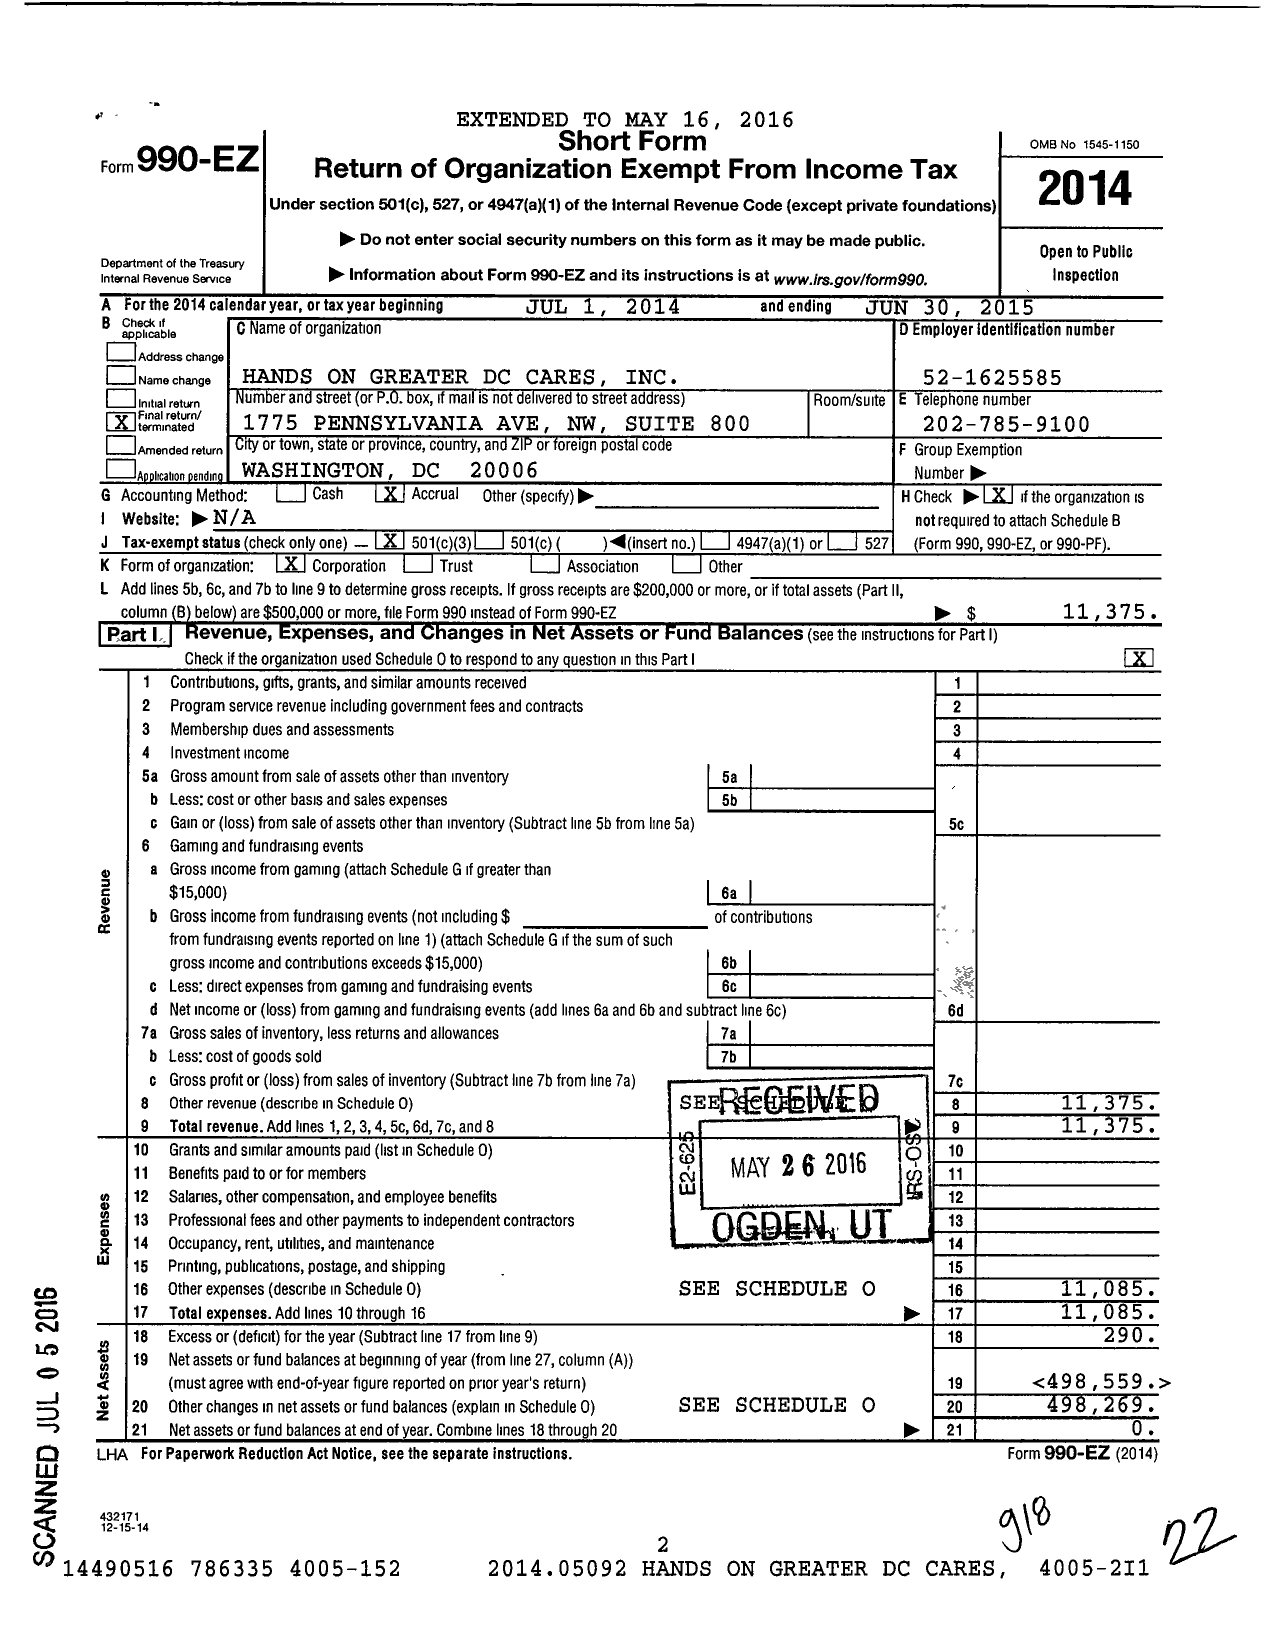 Image of first page of 2014 Form 990EZ for Hands on Greater DC Cares